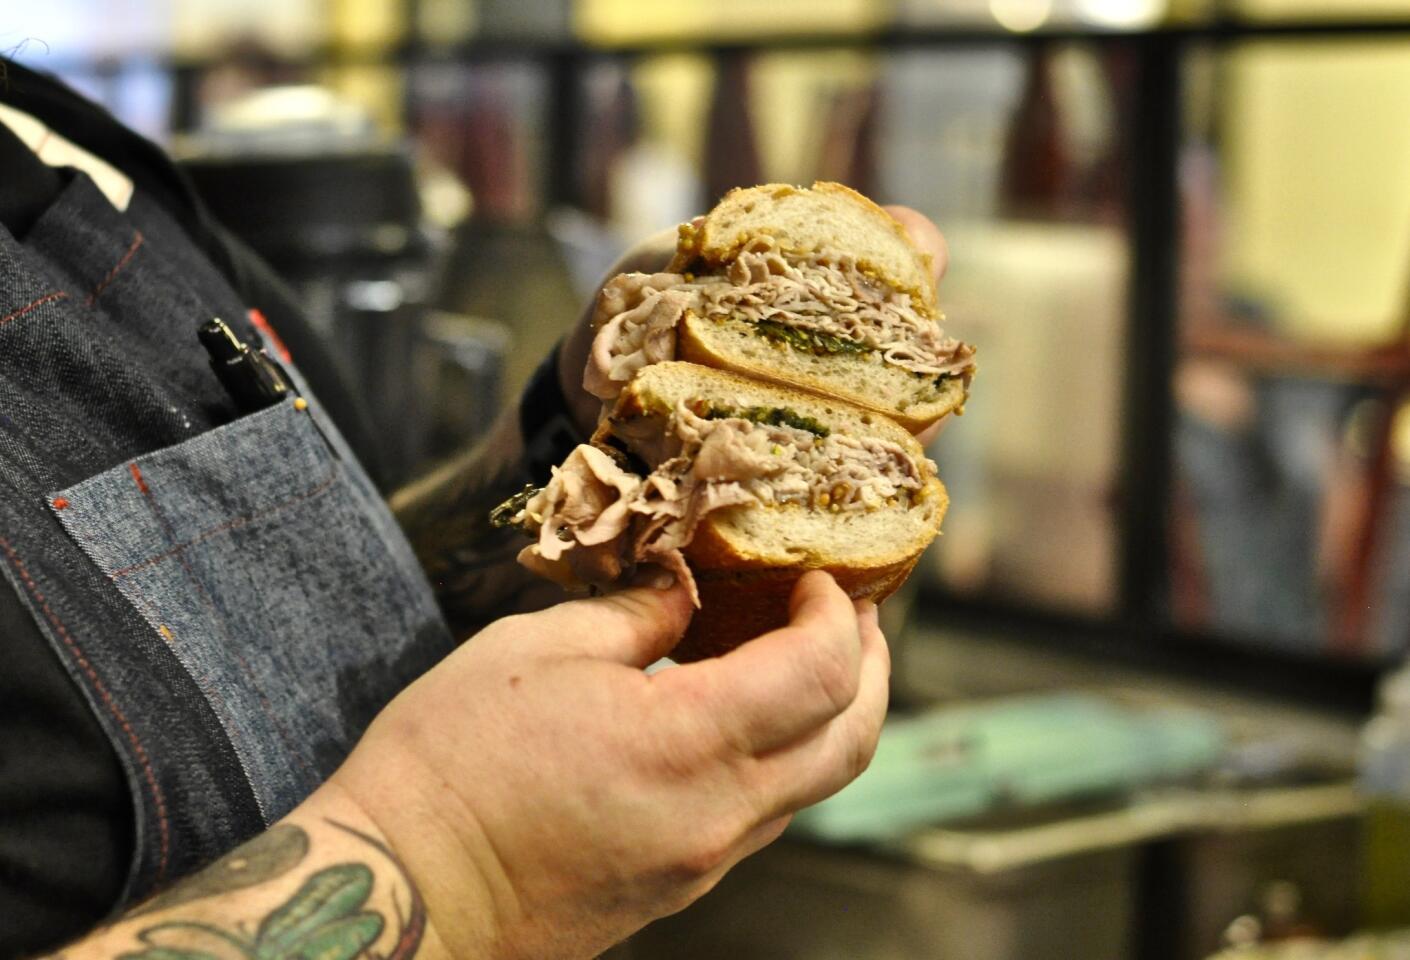 Bruce Kalman, the chef-owner of Knead & Co., holds one of his porchetta dip sandwiches at his new pasta bar in Grand Central Market.